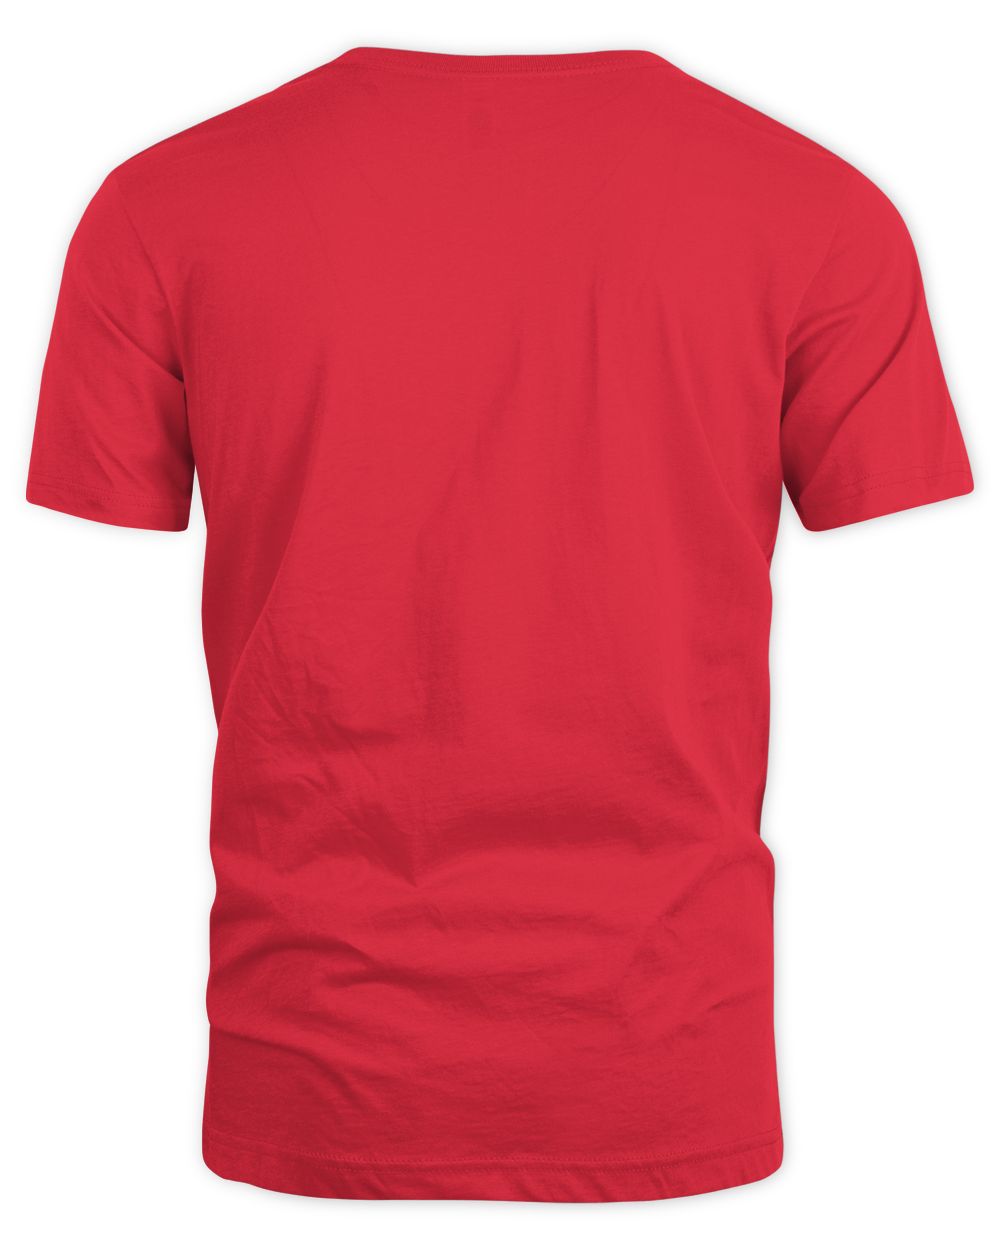 YOUR NAME. The Man. The Myth. The Legend Unisex Standard T-Shirt red 